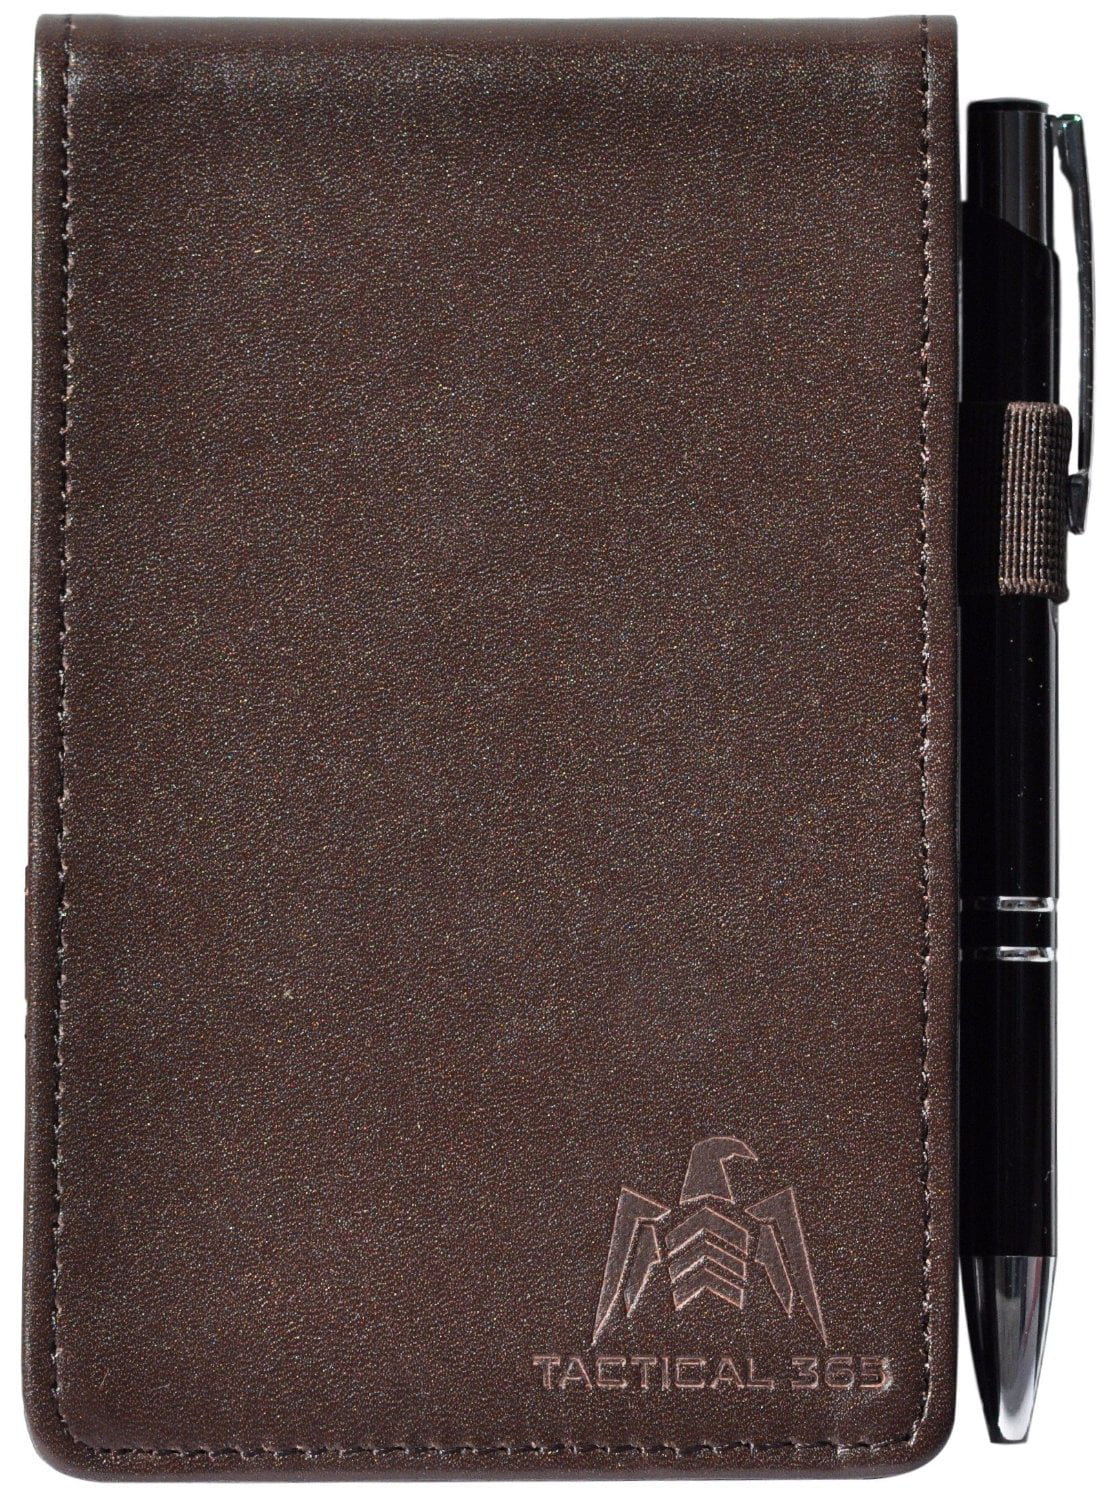 Tactical 365 Operation First Response, Leather Memo Pad Holder